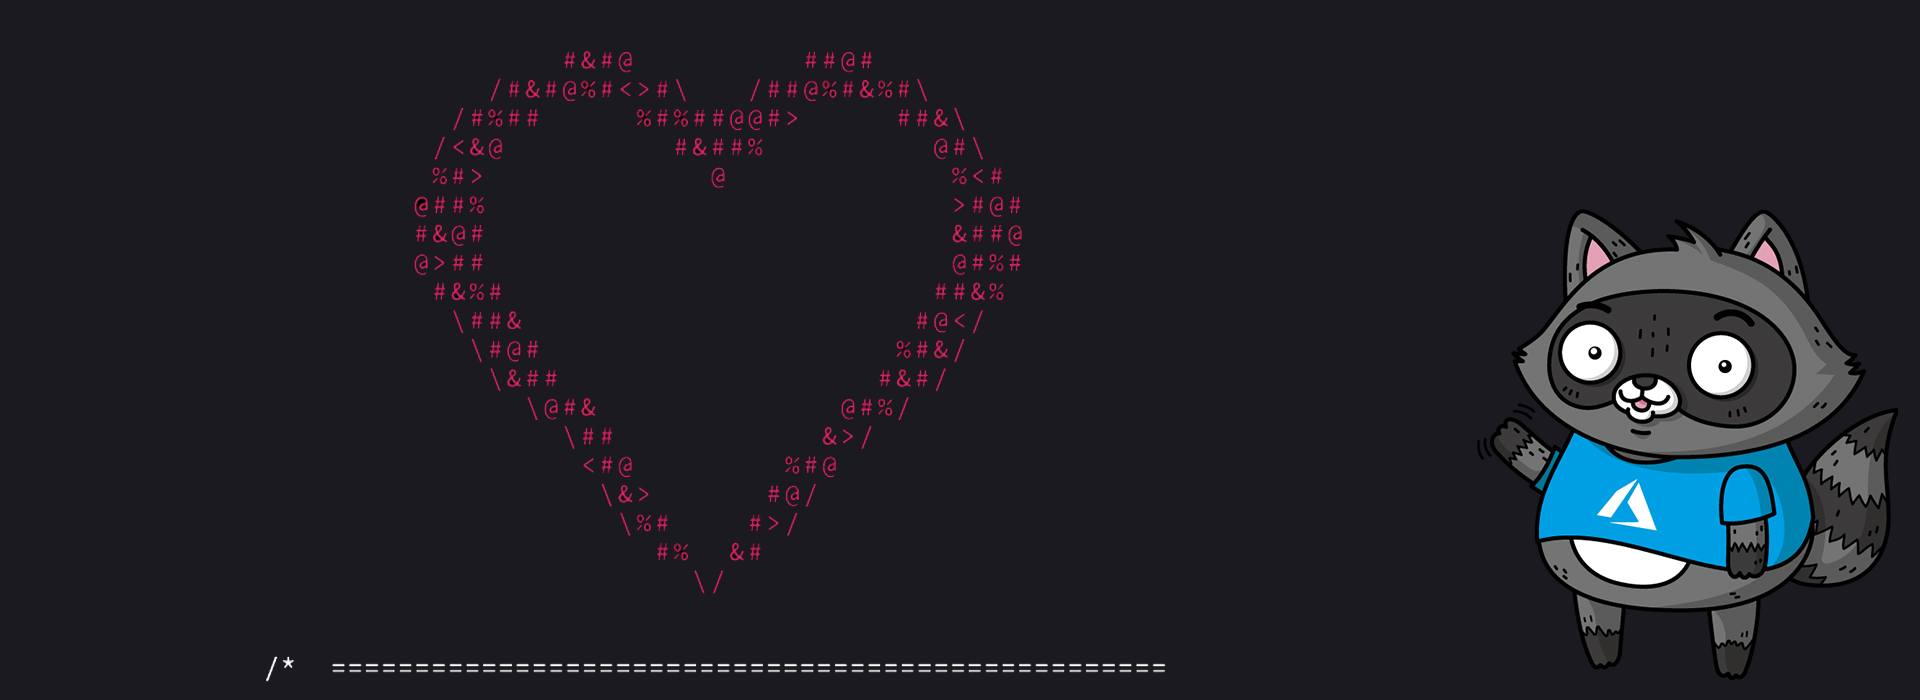 An ASCII image of a heart, next to an image of Bit the Raccoon.